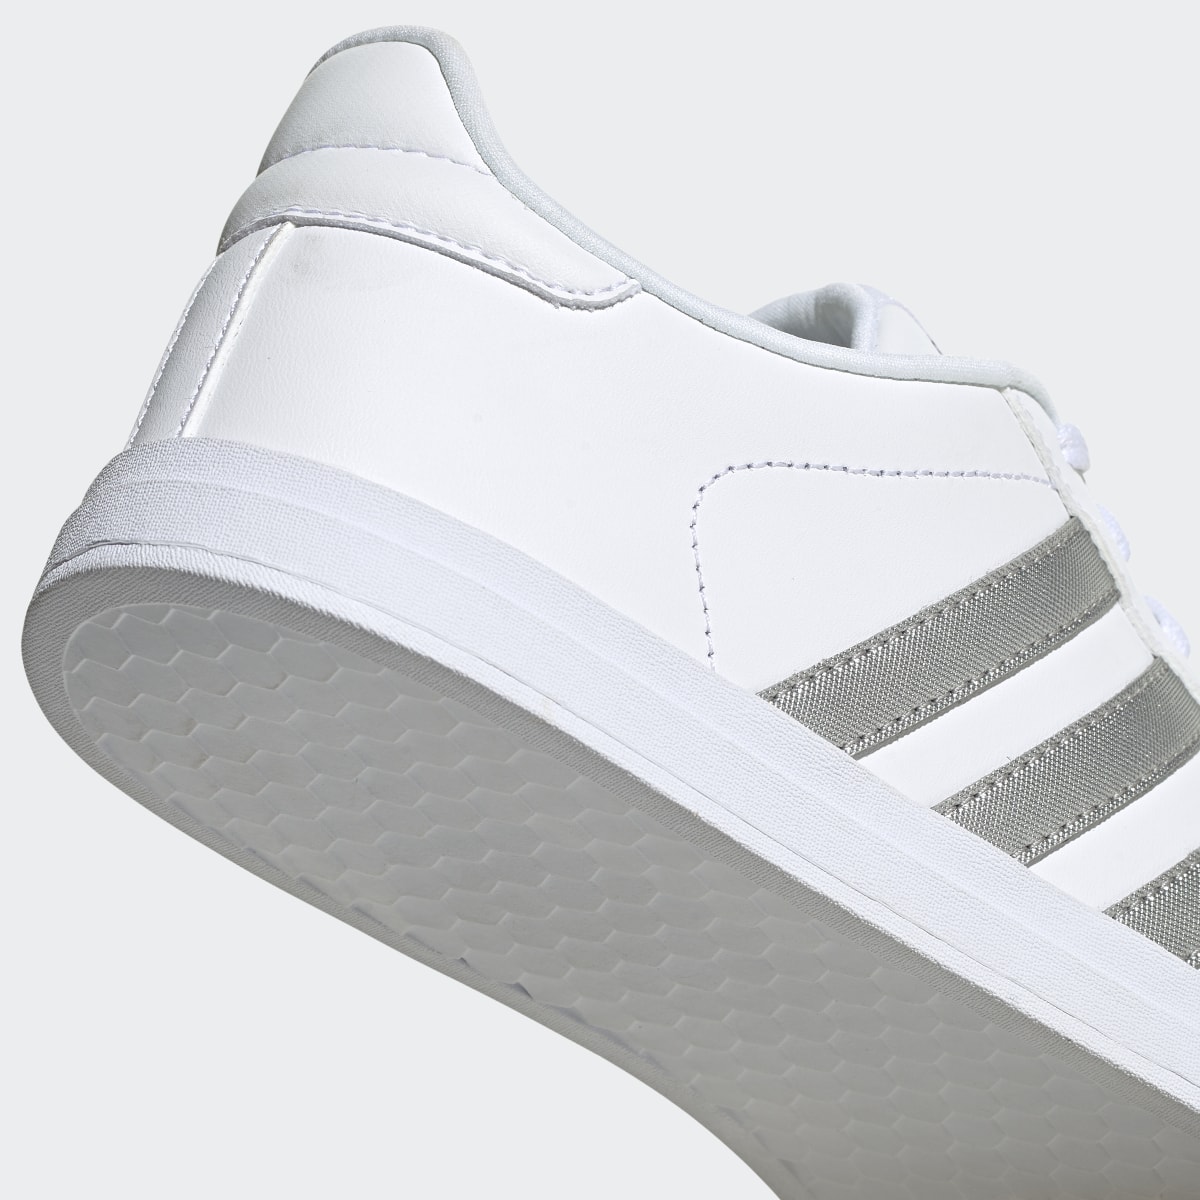 Adidas Courtpoint Shoes. 8